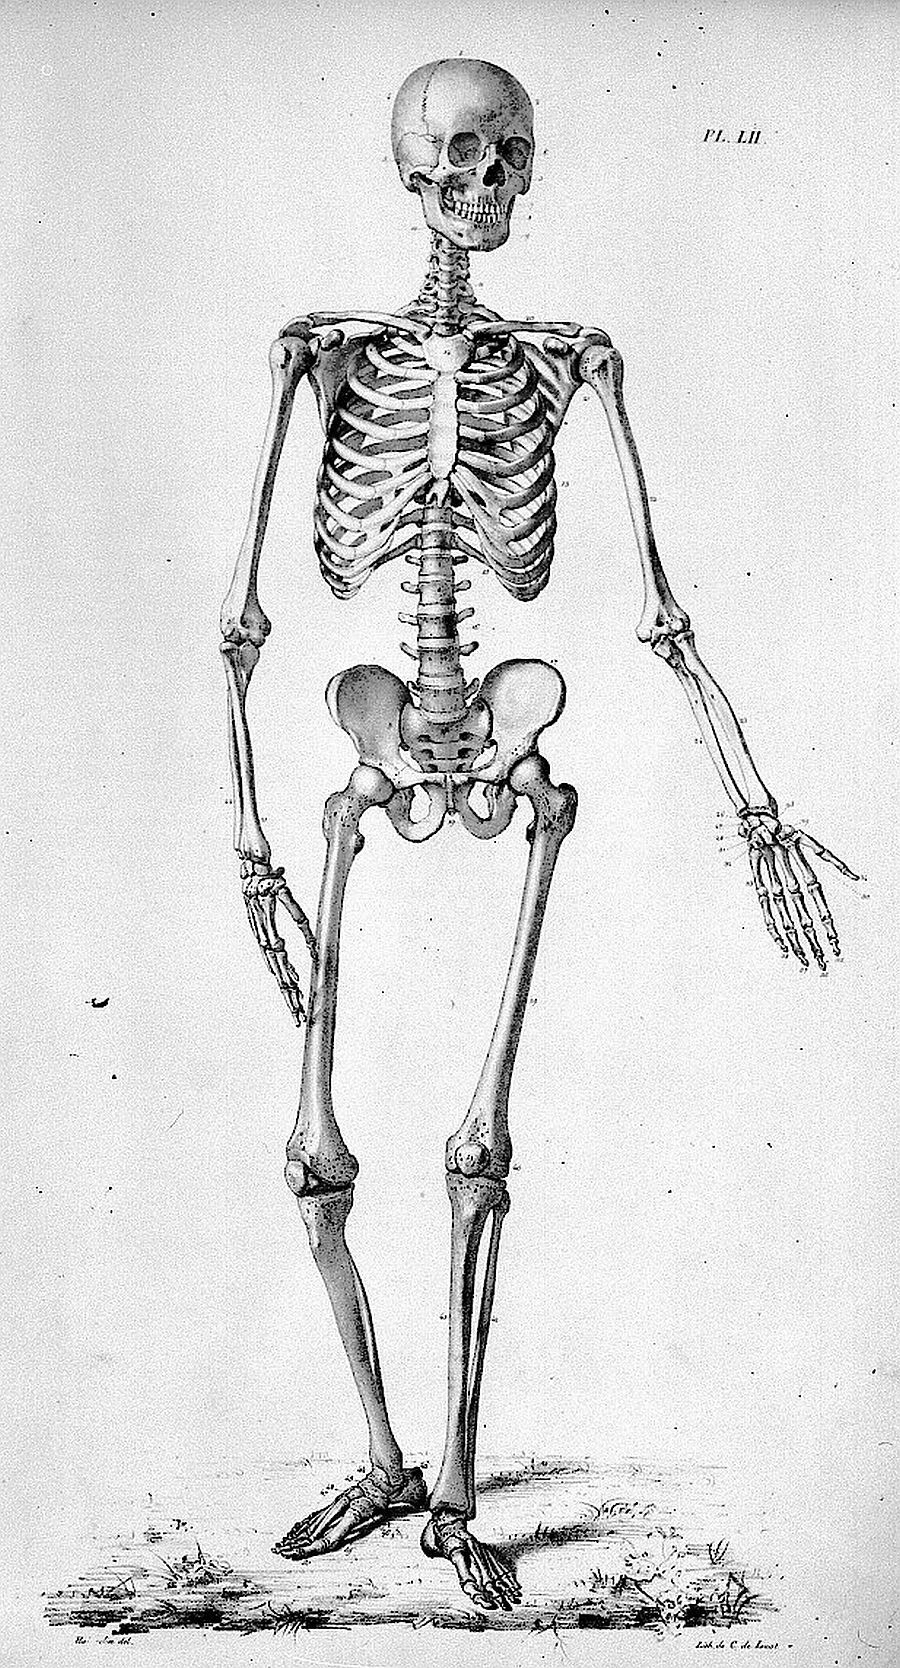 Squelette Humain  Skeleton Drawings, Human Anatomy Art, Skeleton Art pour Image De Squelette Humain A Imprimer